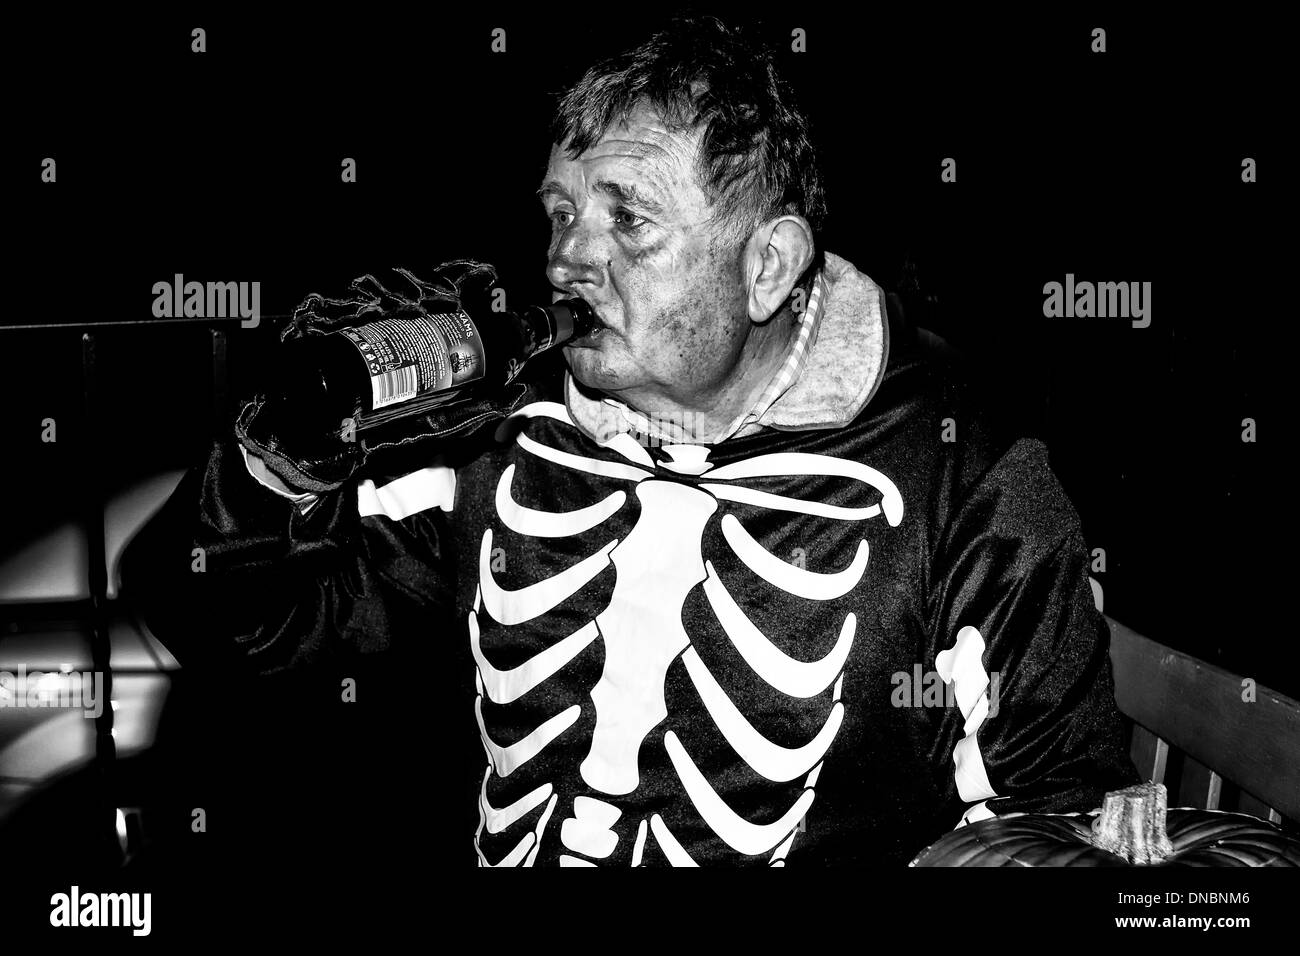 Man in Halloween skeleton costume drinking beer from a bottle Stock Photo